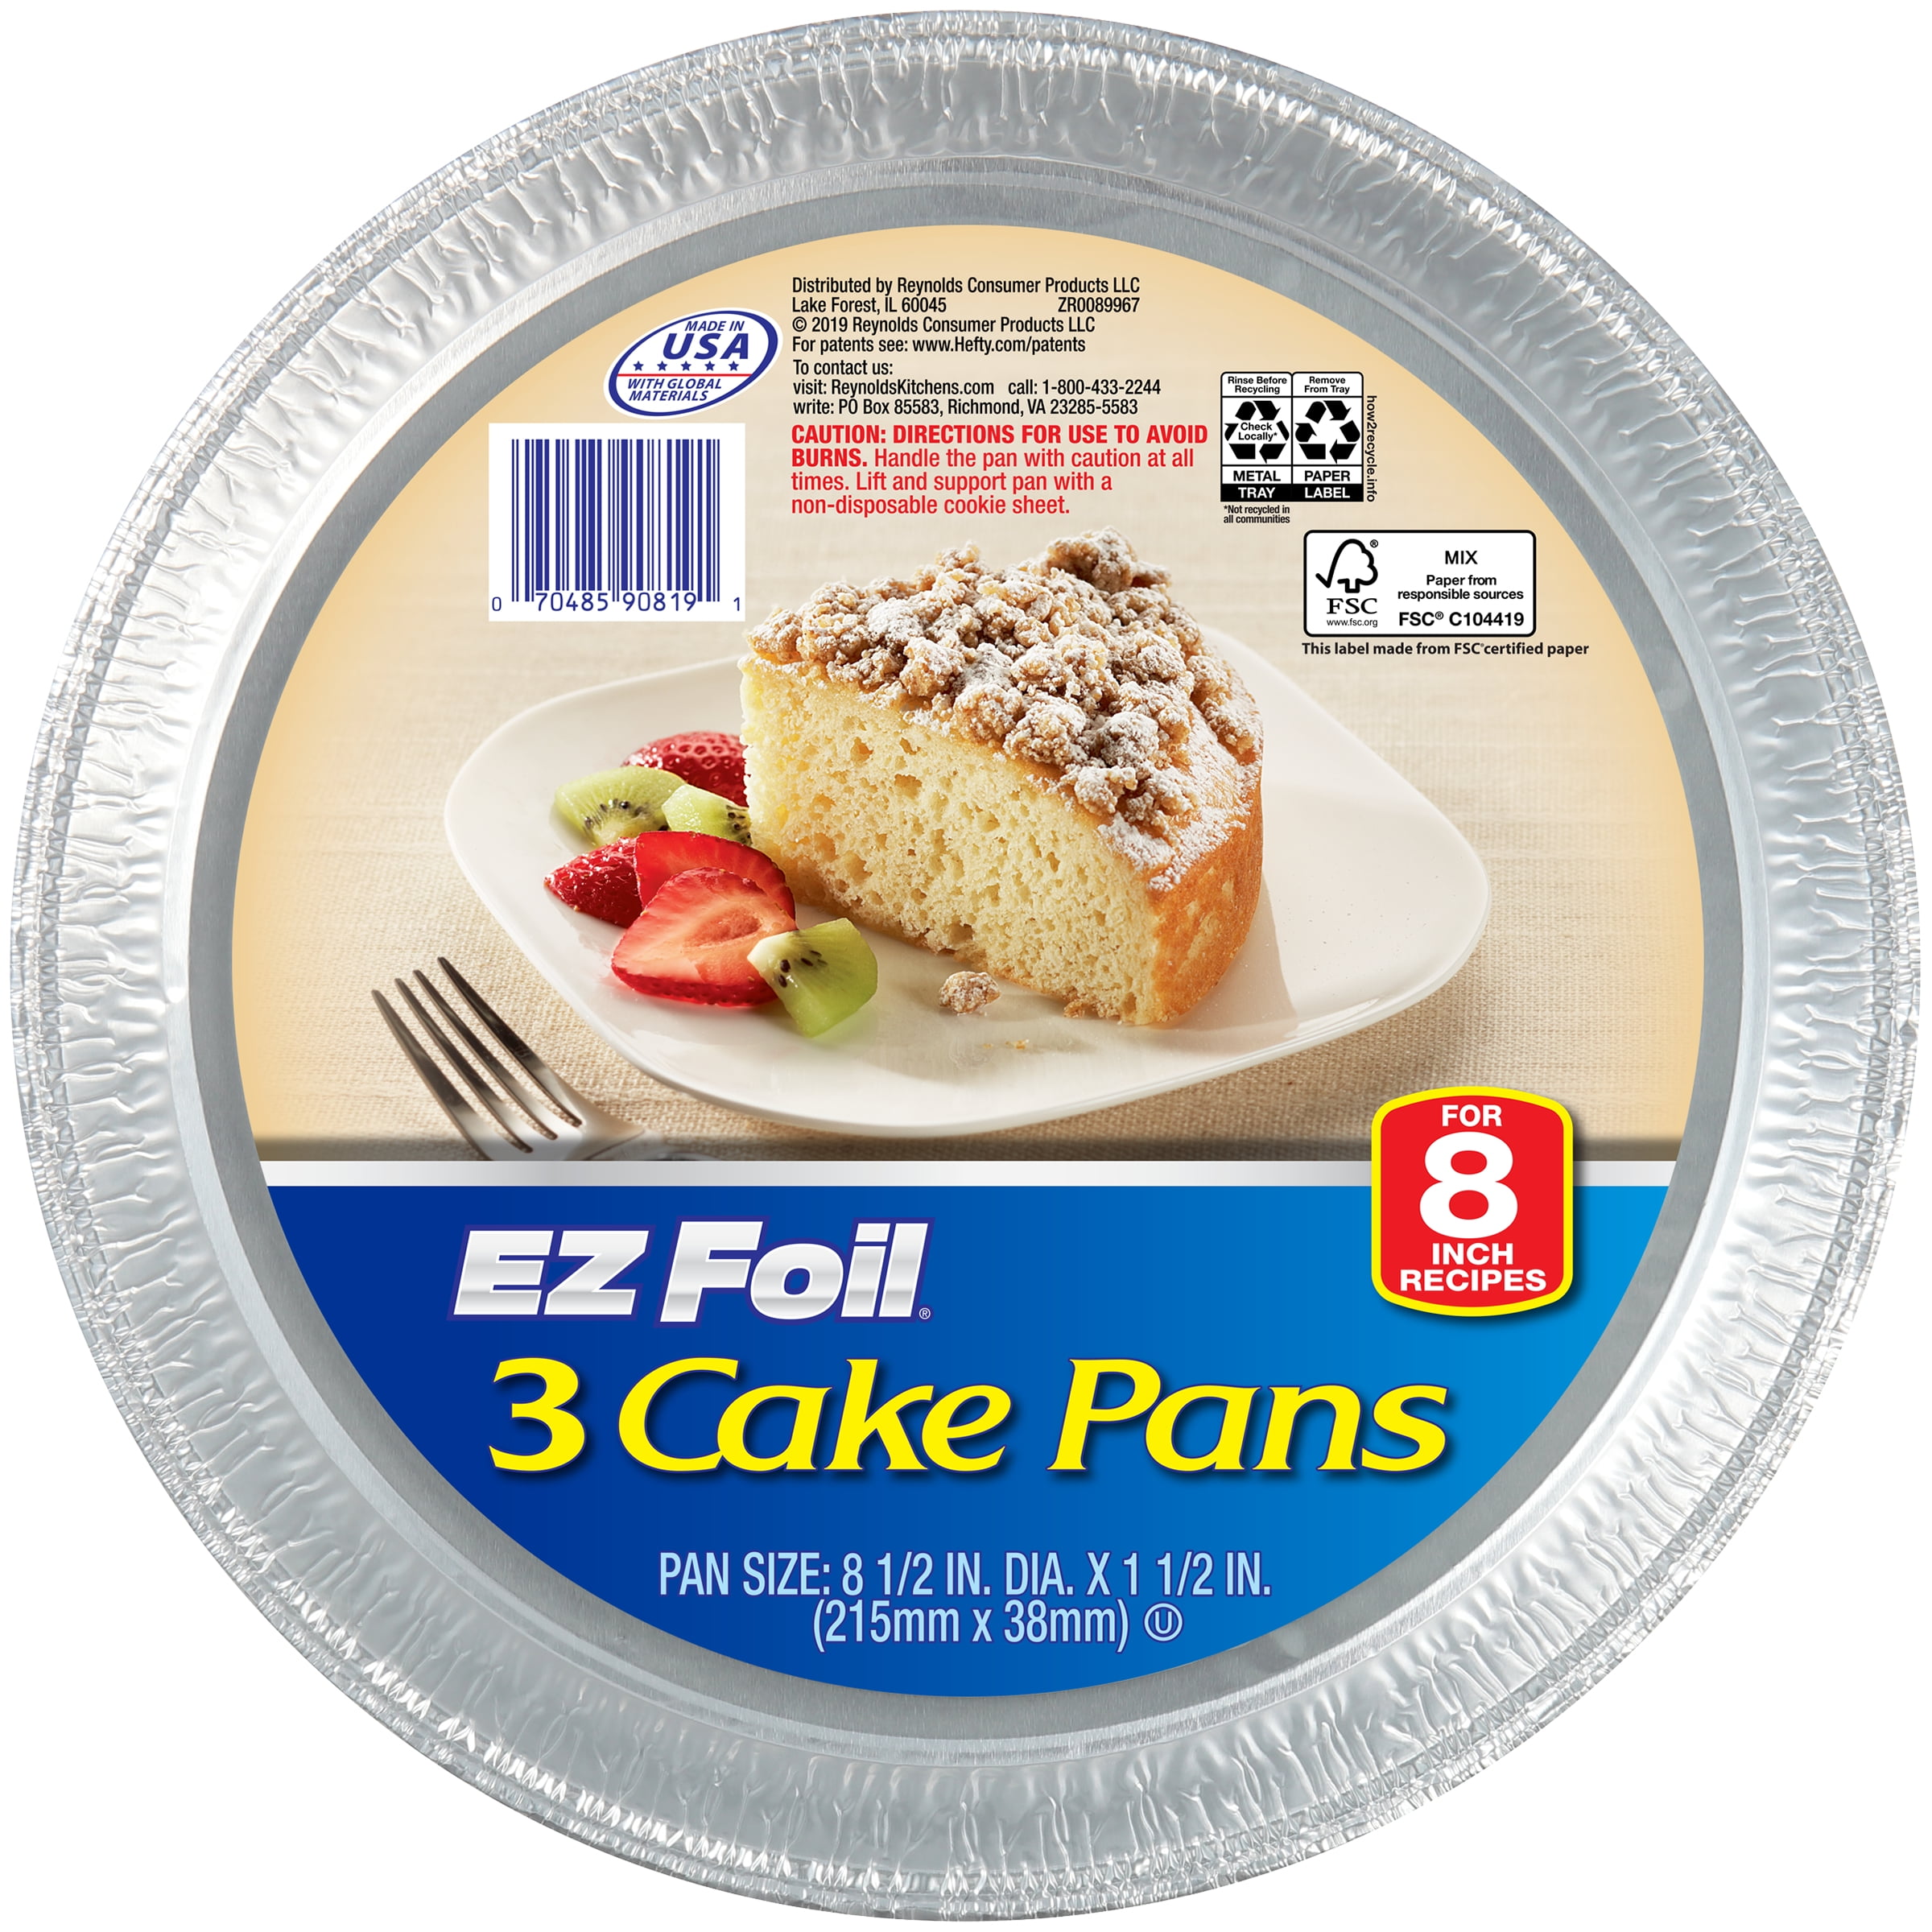 8 inch Aluminum Foil Round Baking Pan Pack of 40 Pans 